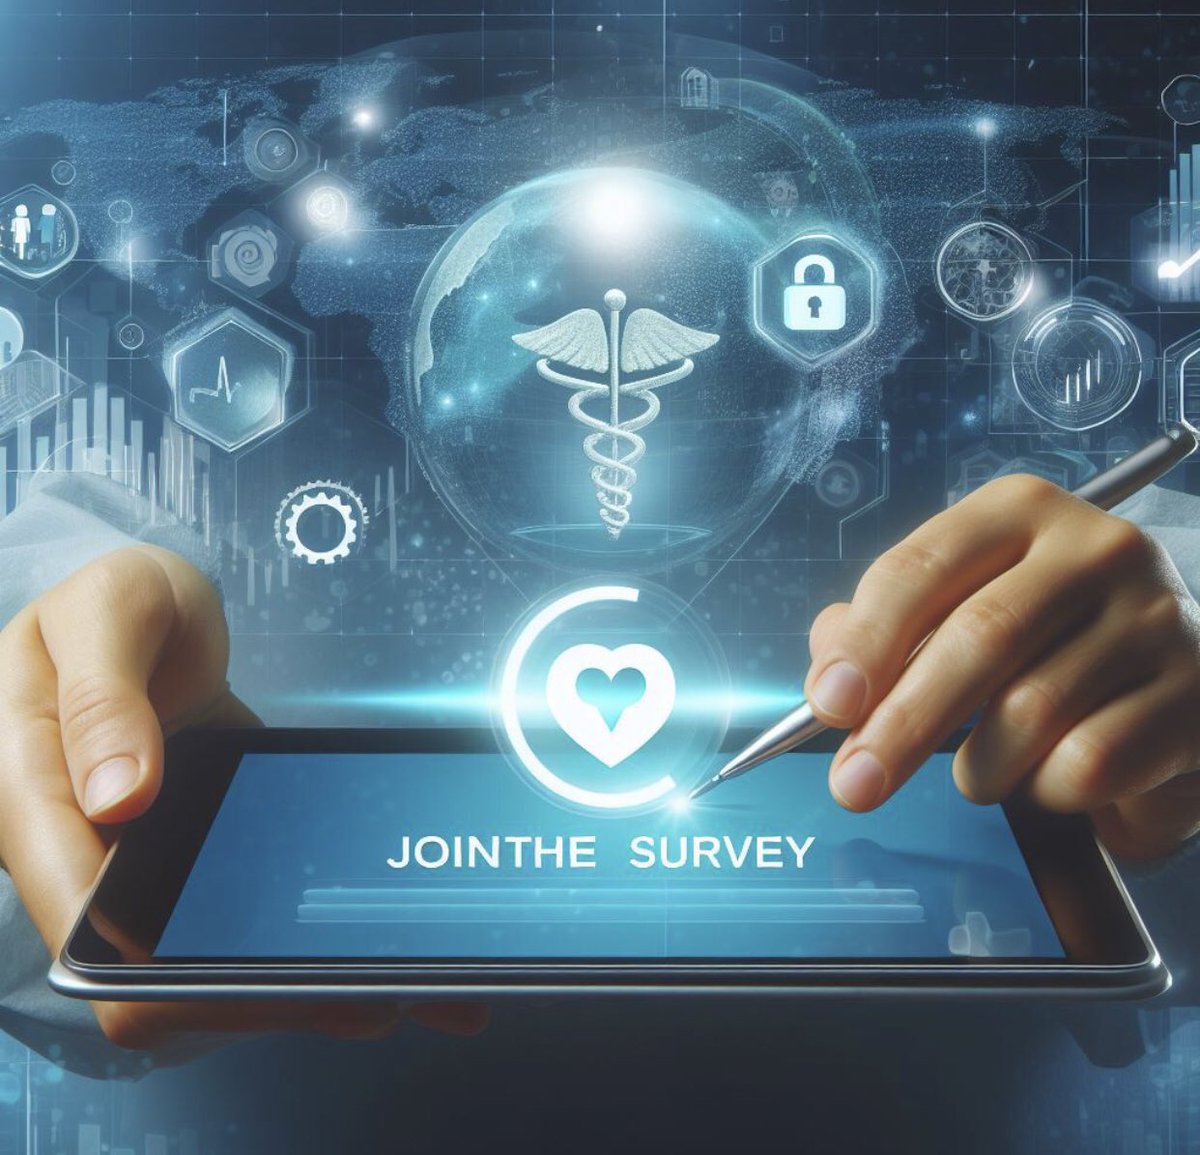 🚀 Calling all healthcare professionals! 🏥💻 Share your expertise and help shape the future of digital health. Take our survey on digital health competencies to drive innovation and excellence in patient care. Your voice matters! #HealthTech 🌟 tinyurl.com/3aajsxht 🌟